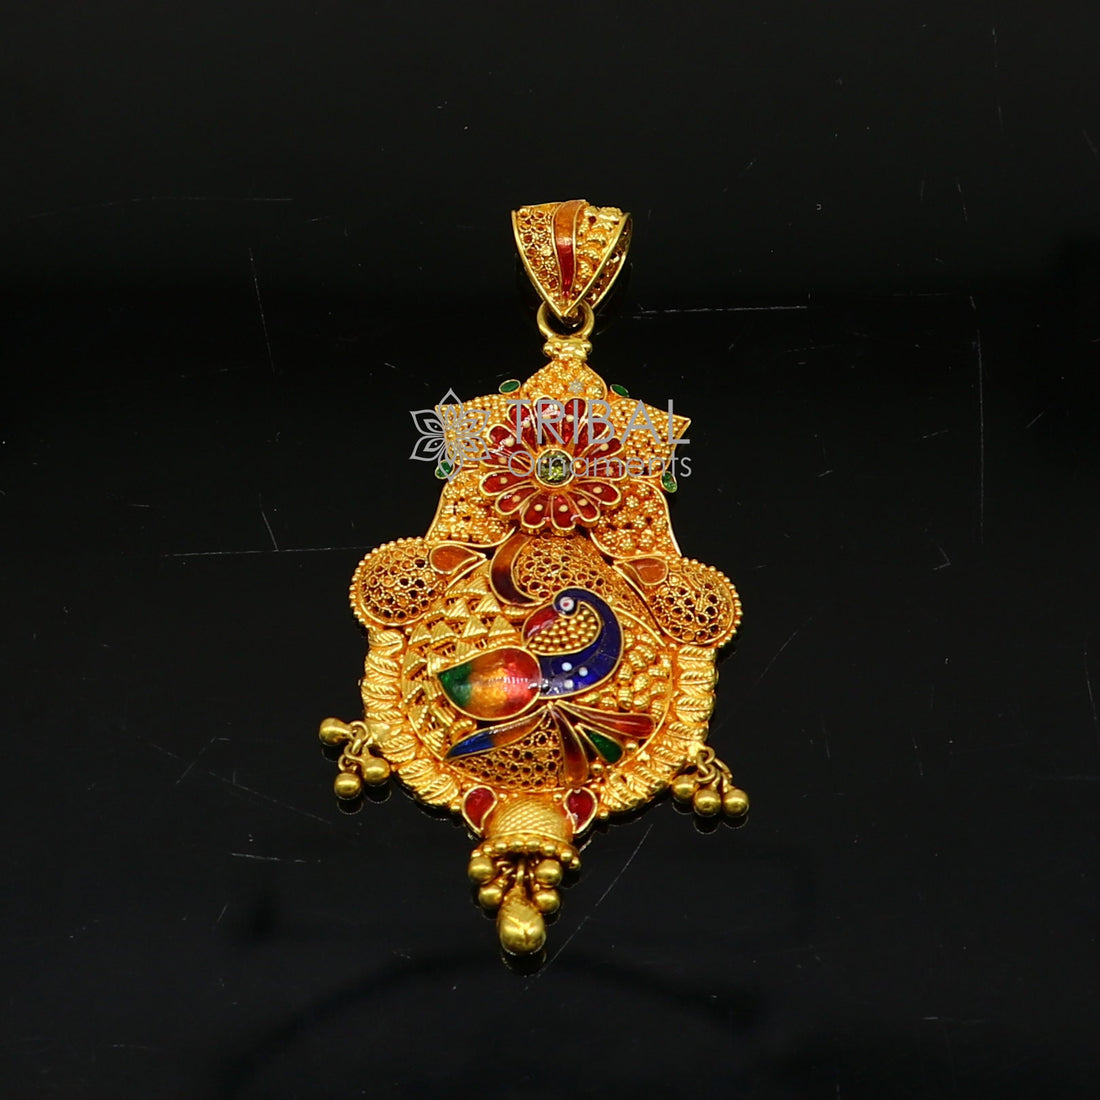 Peacock design Traditional cultural filigree work trendy 22kt yellow gold functional pendant, amazing ethnic brides pendant jewelry gp26 - TRIBAL ORNAMENTS